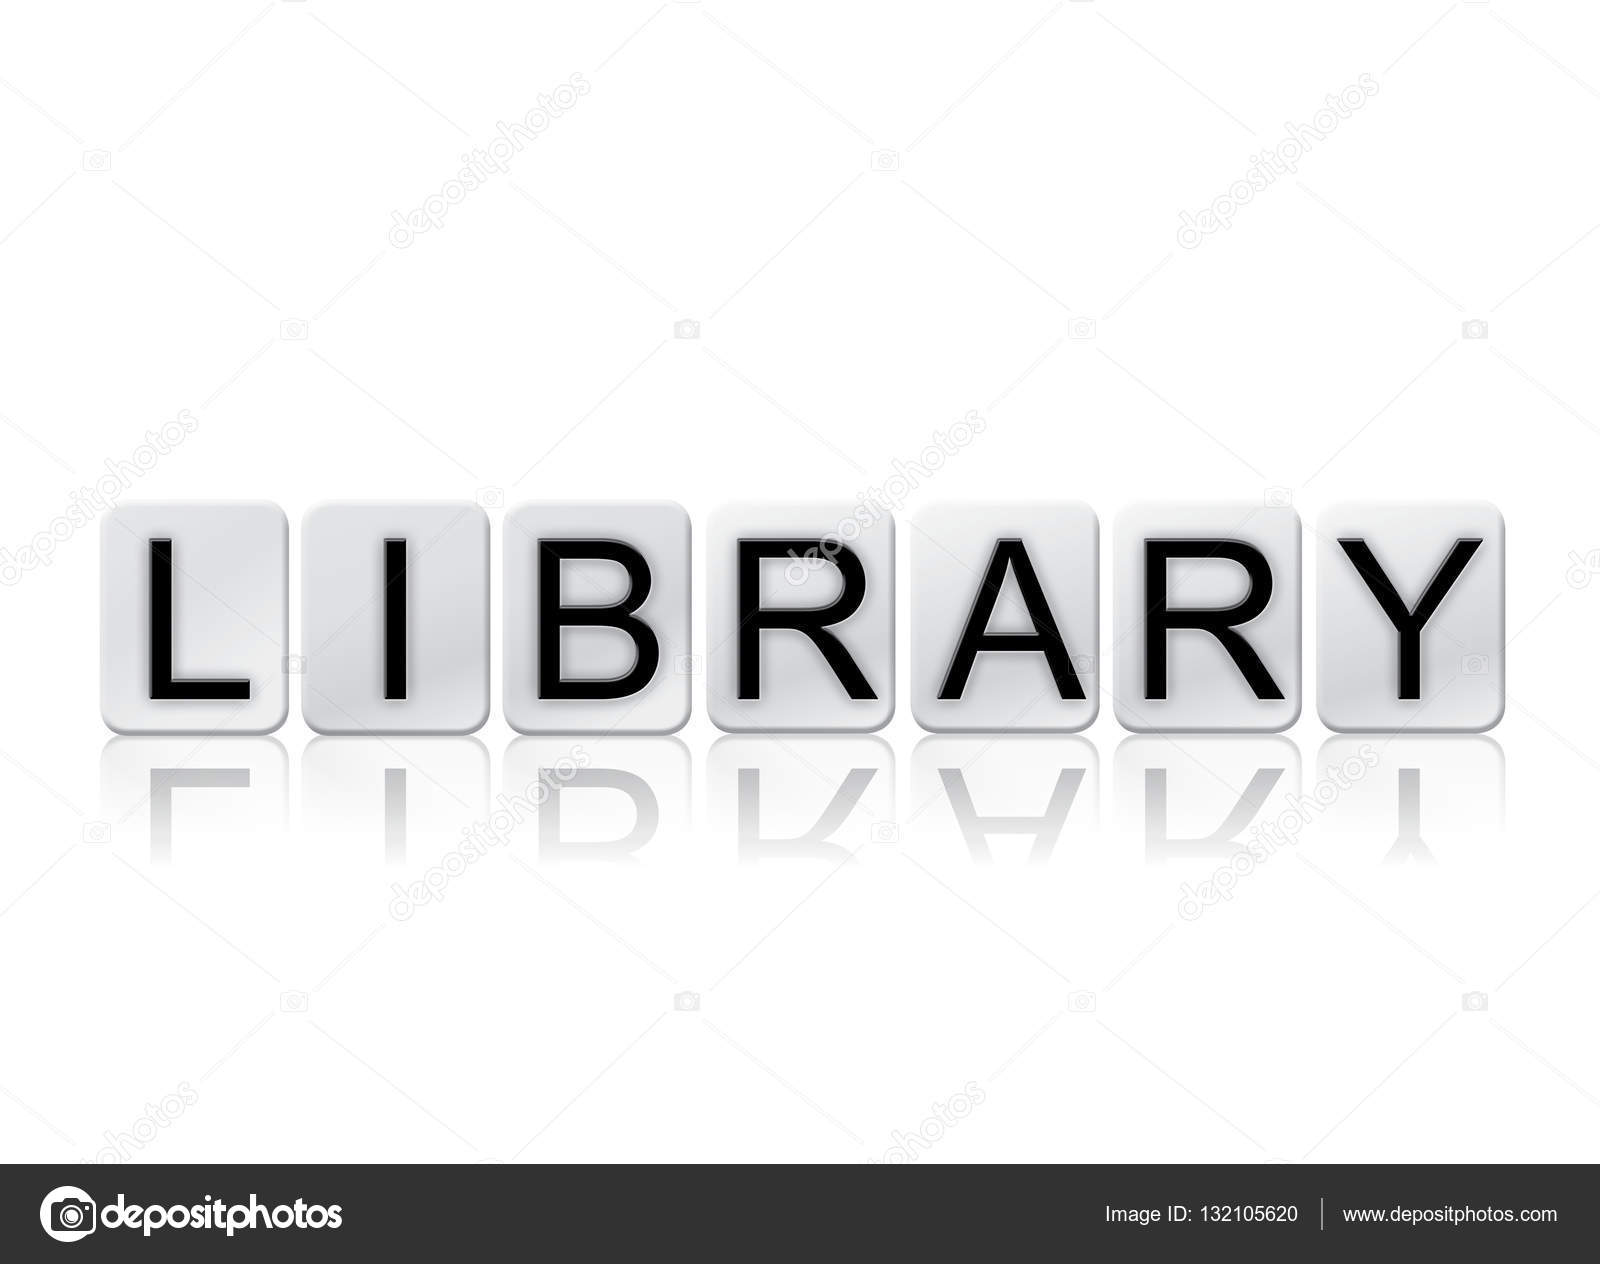 Library Isolated Tiled Letters Concept and Theme Stock Photo by ...